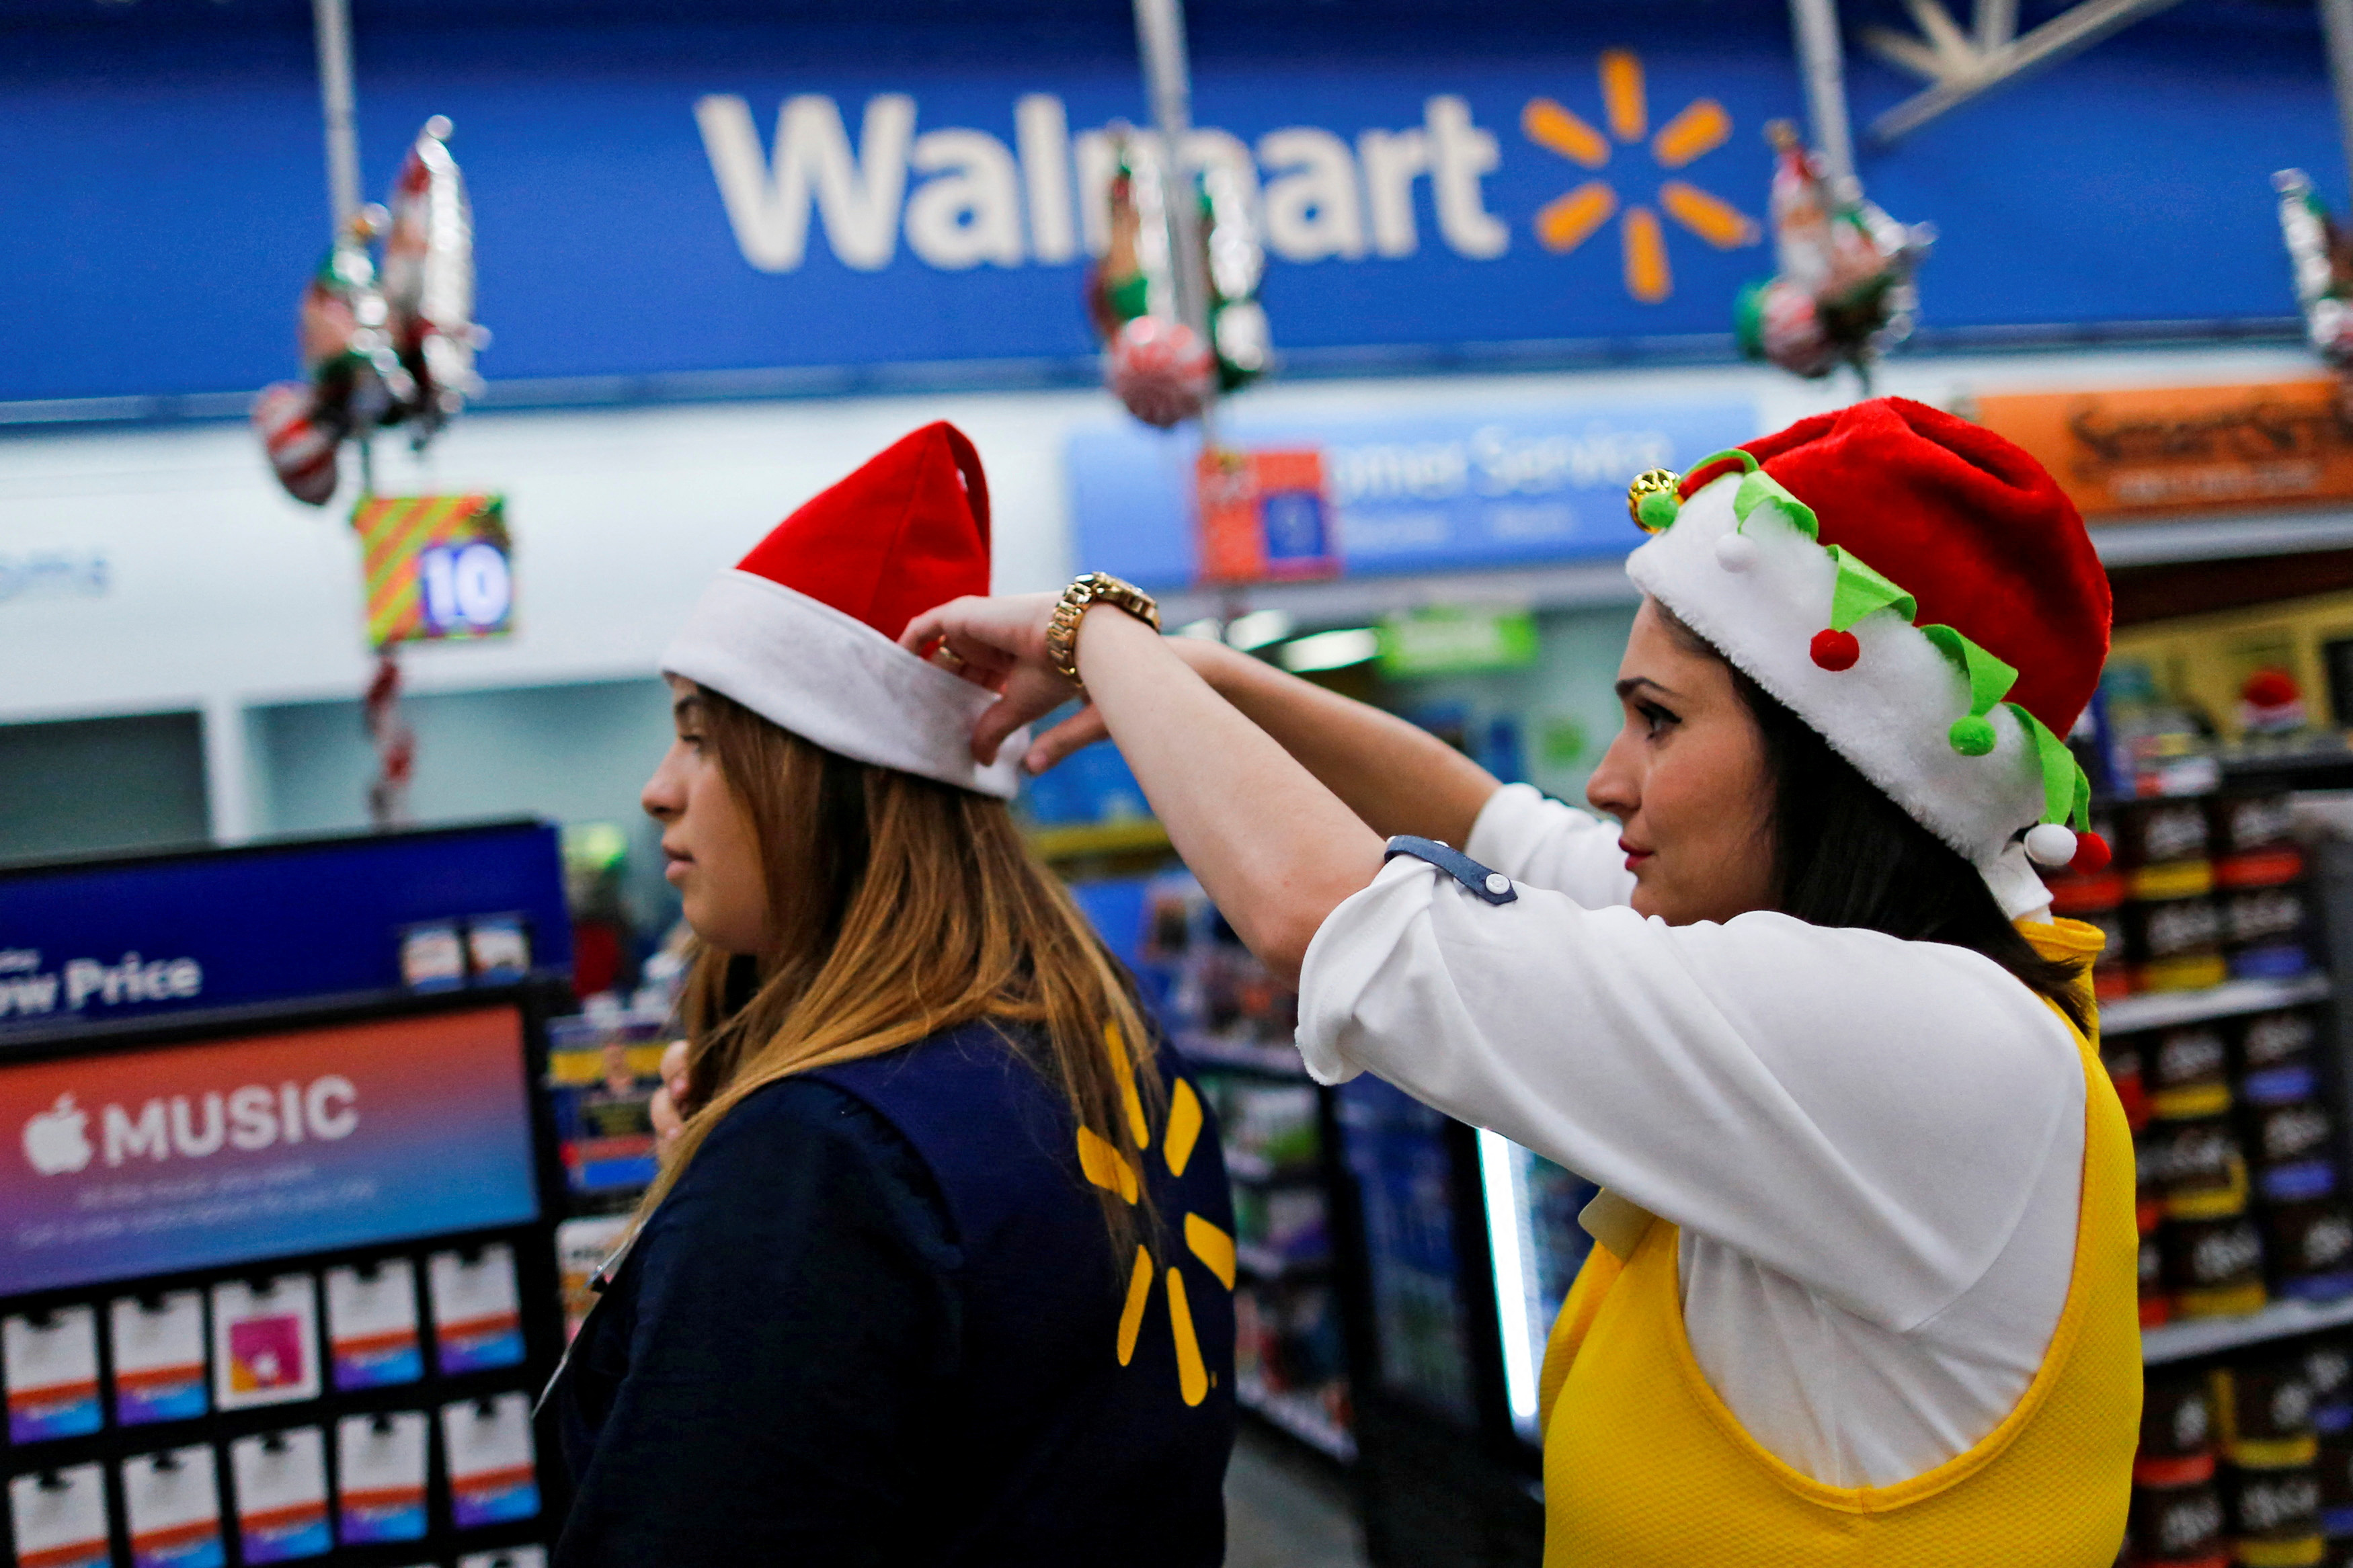 Walmart Raises Forecast and Says Shelves Are Stocked for Holiday